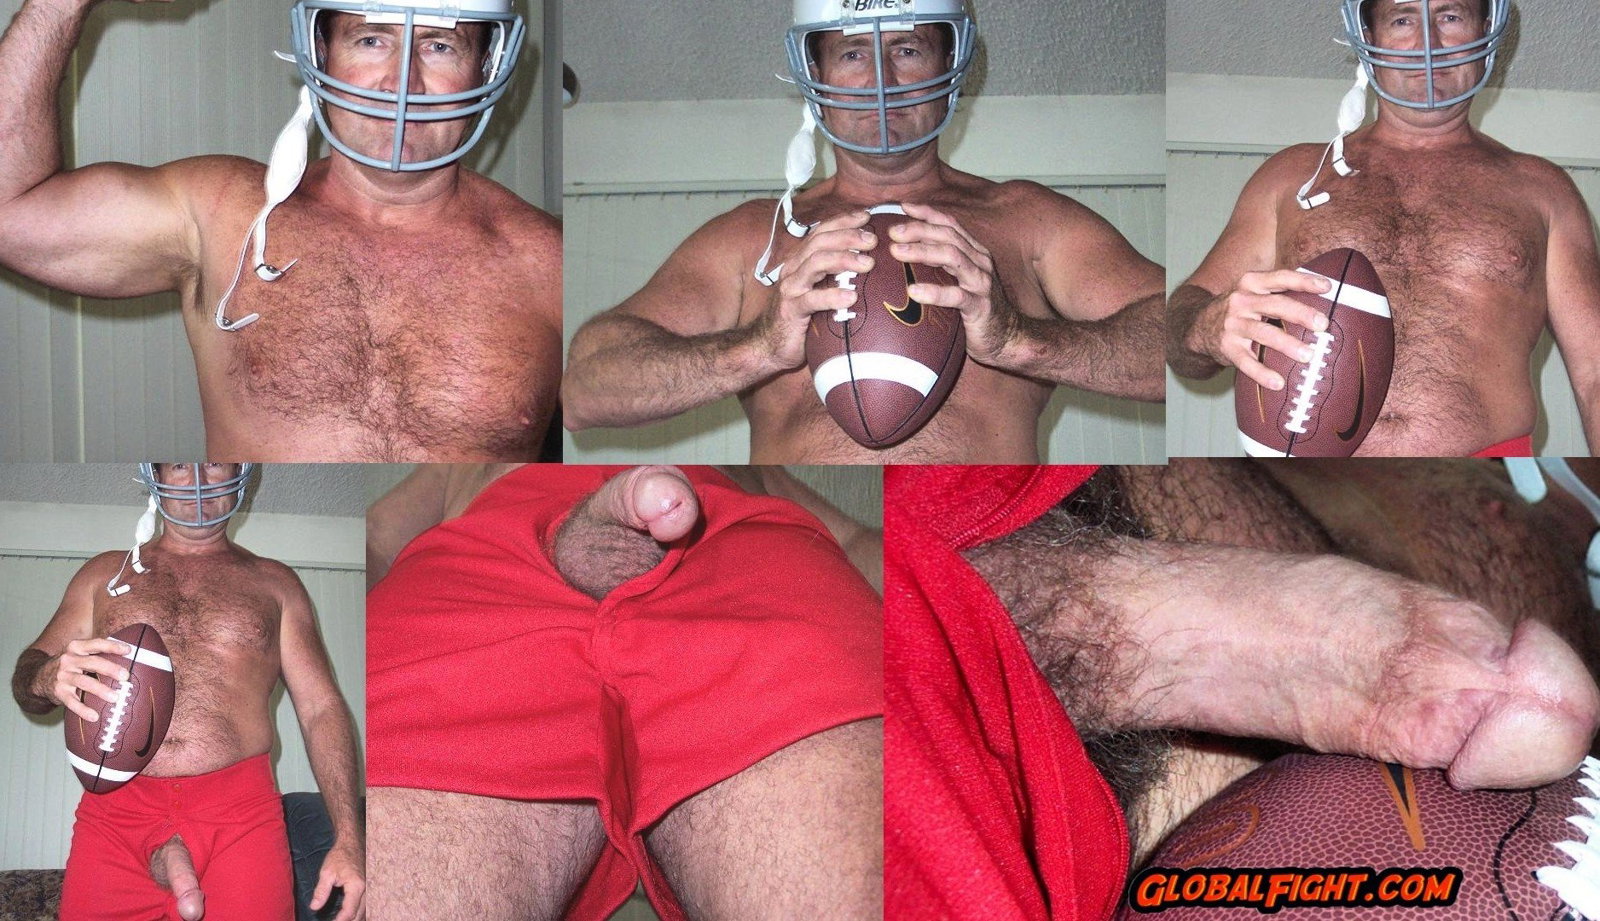 Photo by Hairy Musclebears with the username @hairymusclebears,  June 3, 2022 at 1:03 PM. The post is about the topic Carolina Jim Musclebear and the text says 'Football Jim VIEW HIS DAILY NUDE JACKOFF POSTS of himself at GLOBALFIGHT com  --  #muscledaddy #football #gay #gayfetish #uniform #lockerroom #hairybear #hairychest #hungcock #bigdick'